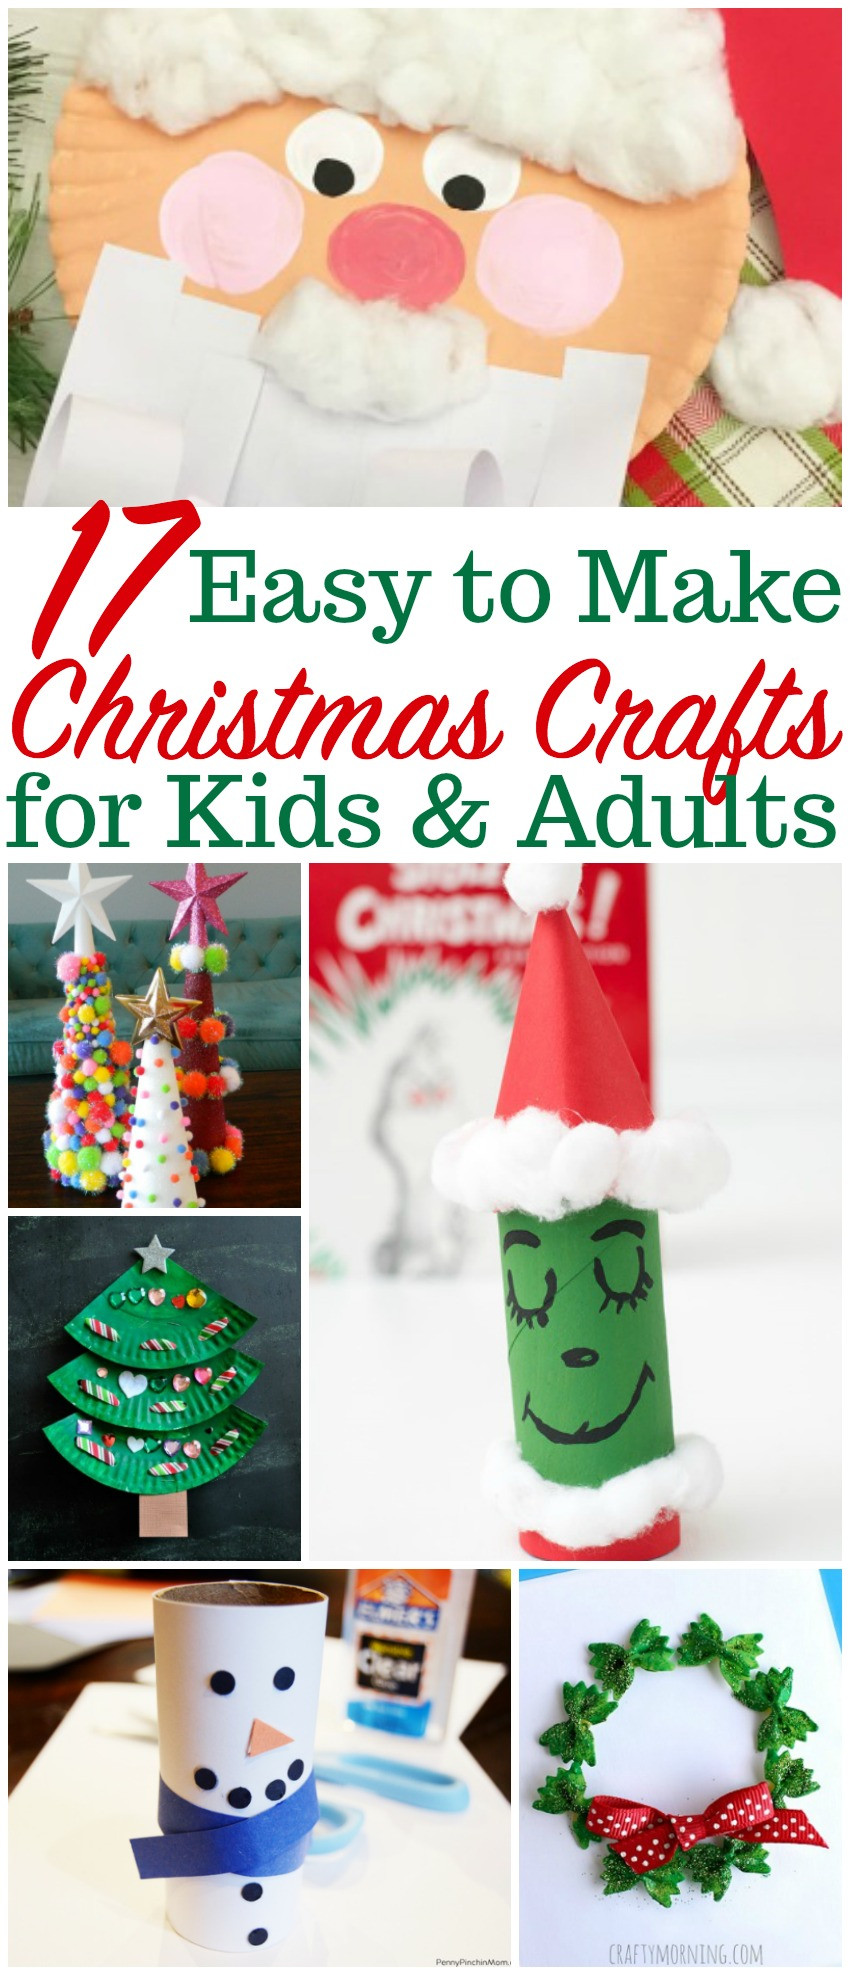 Best ideas about Christmas Crafts For Adults Pinterest
. Save or Pin Easy Christmas Crafts for Kids and Adults to Create Now.